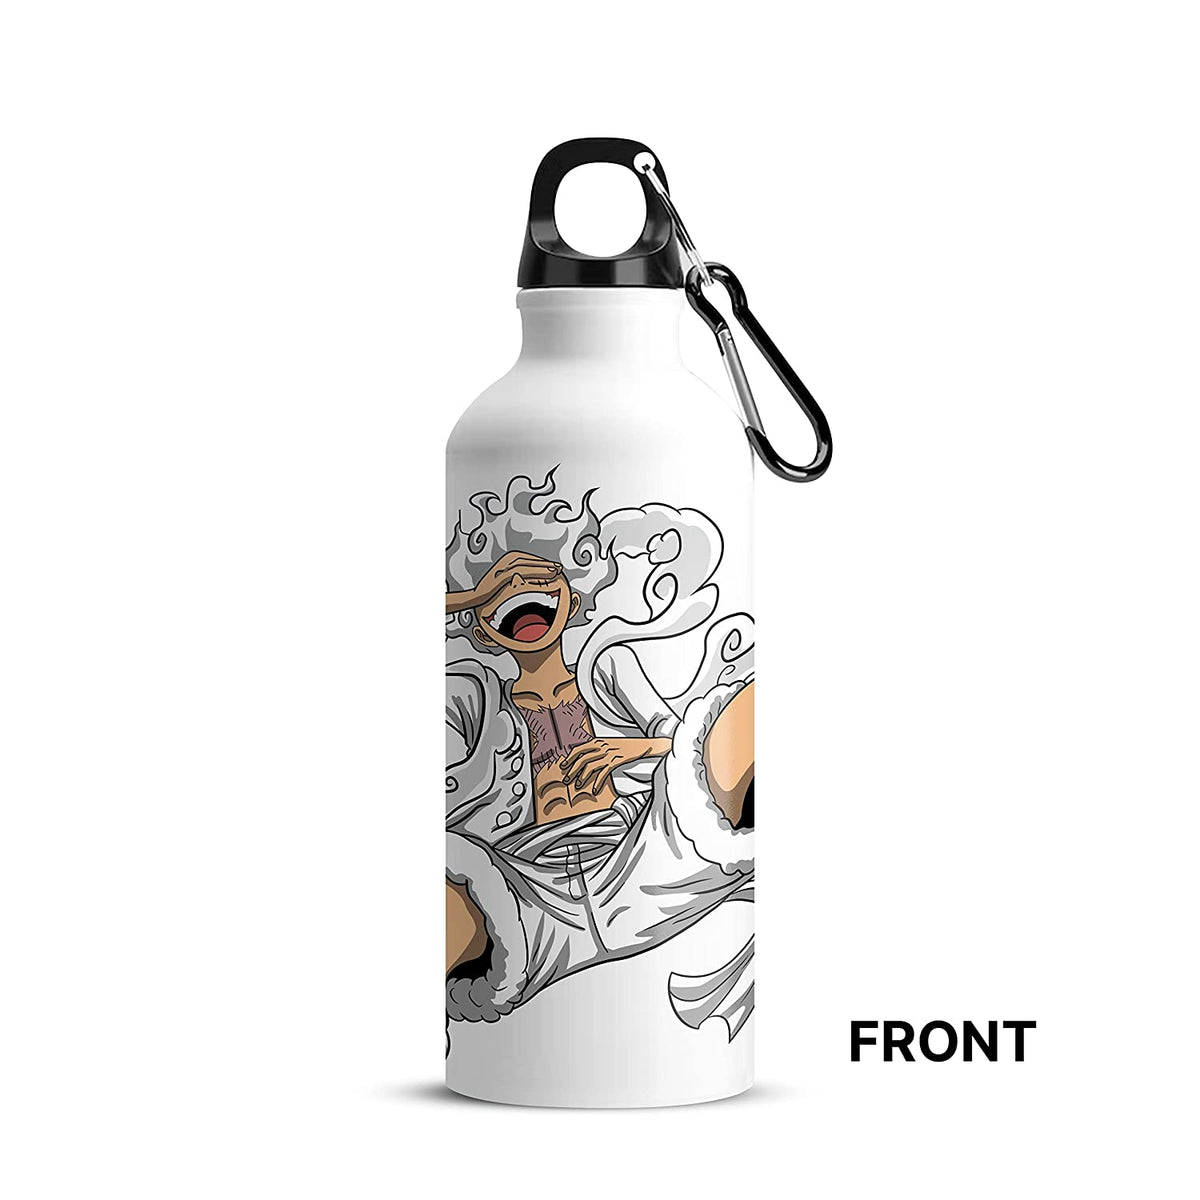 Anime - Nothing Happened Aluminum Water Bottle / Sports Sipper